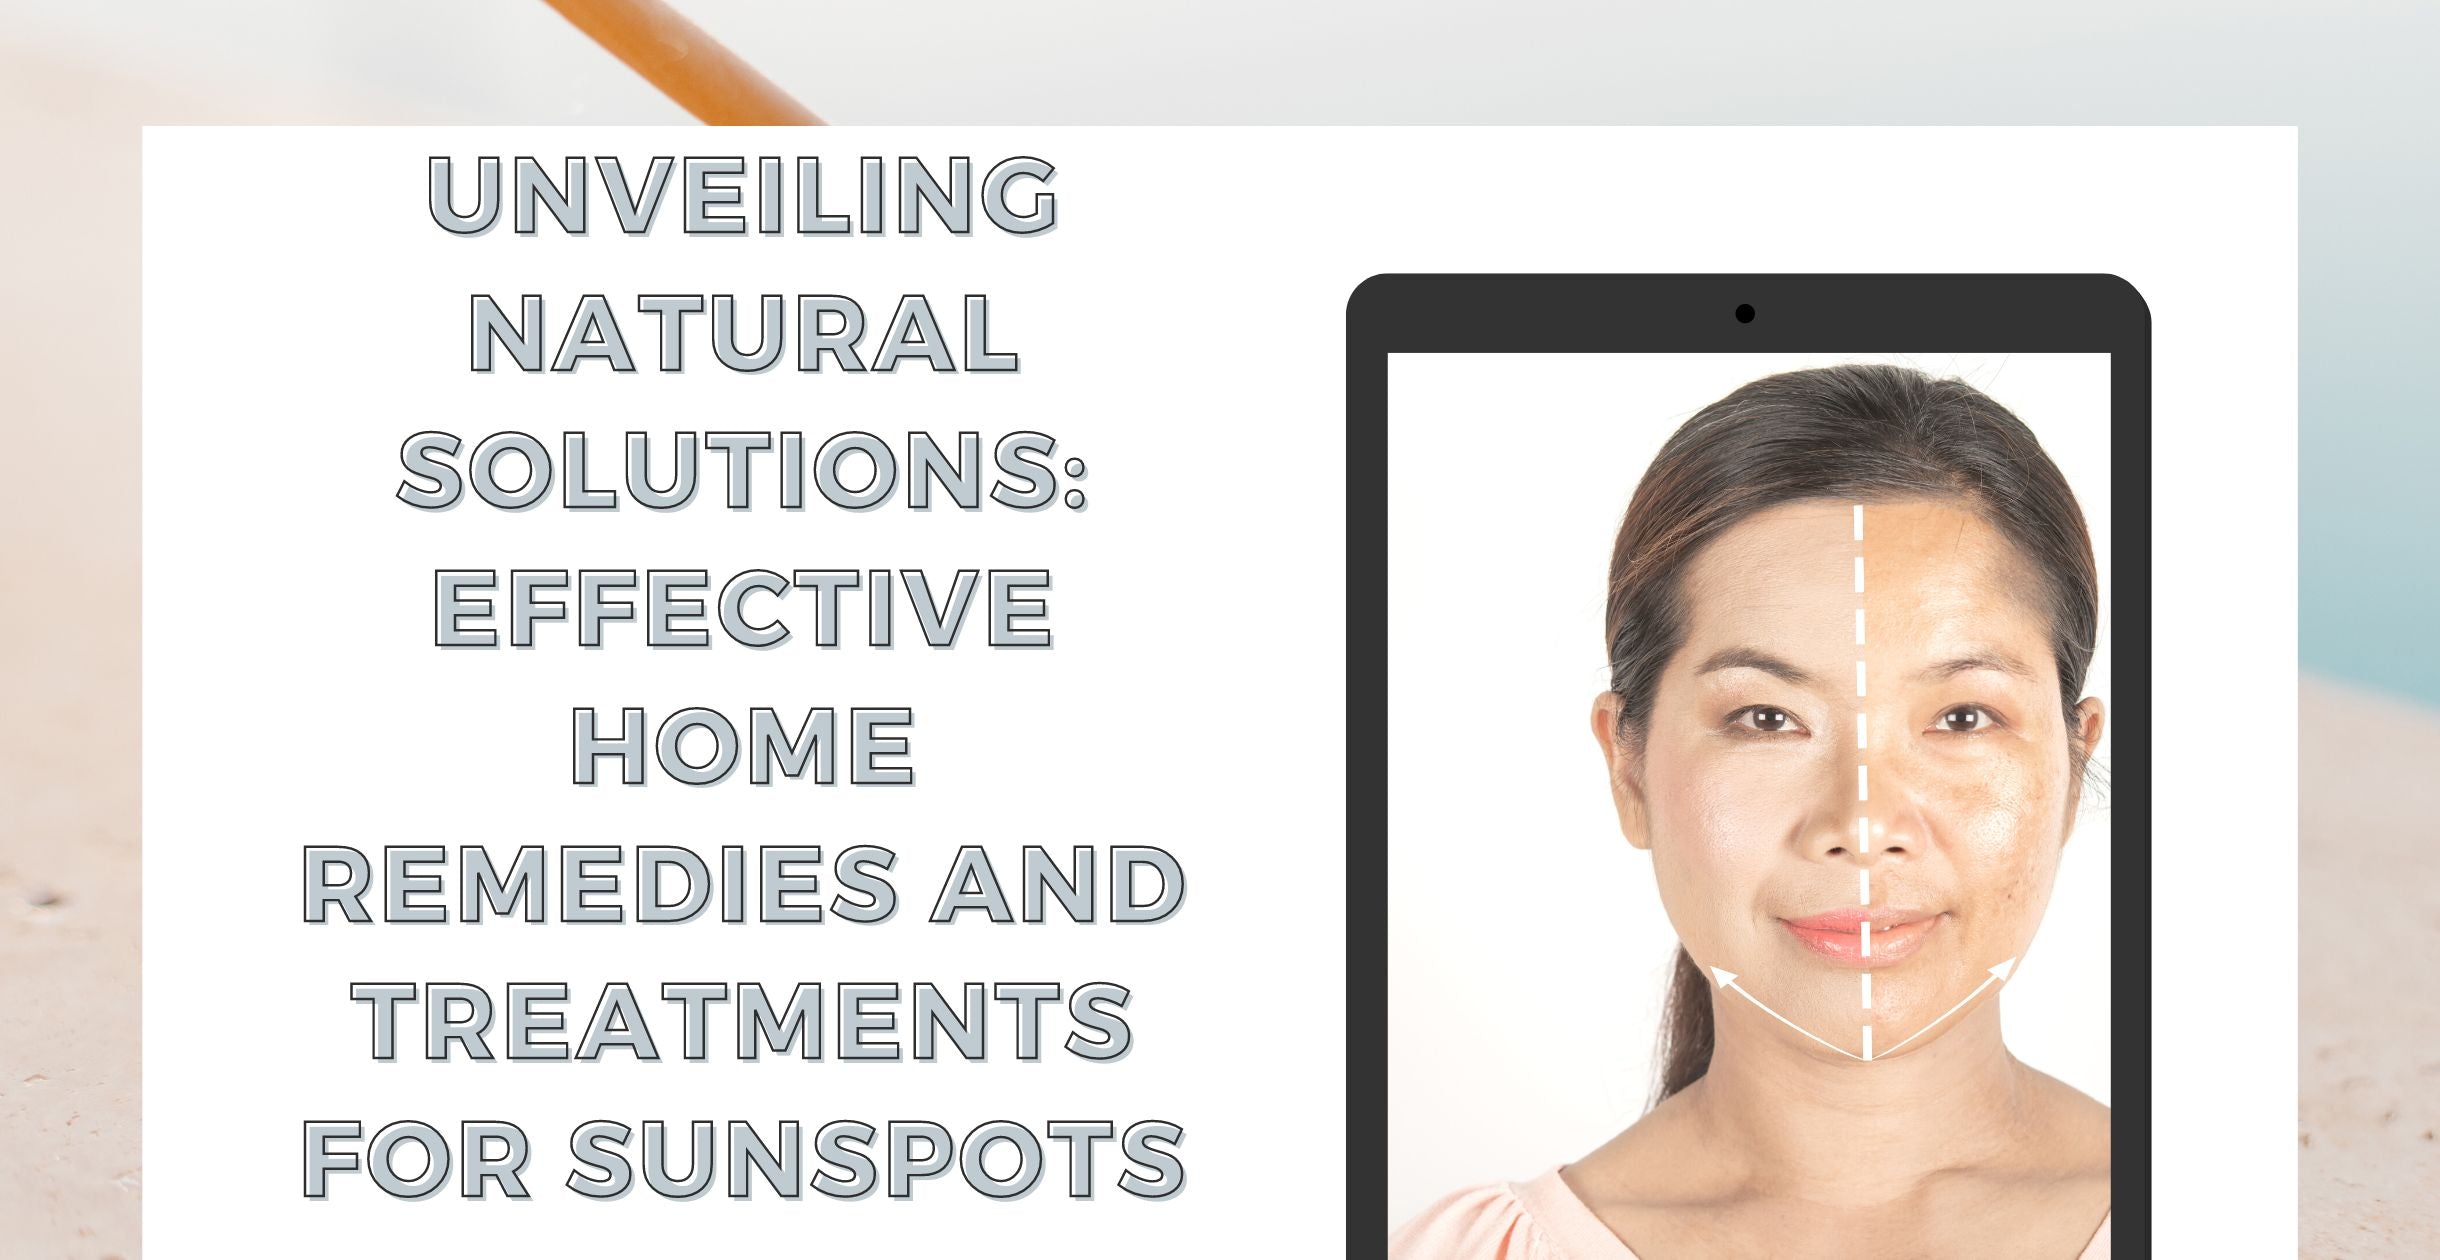 Unveiling Natural Solutions: Effective Home Remedies and Treatments for Sunspots